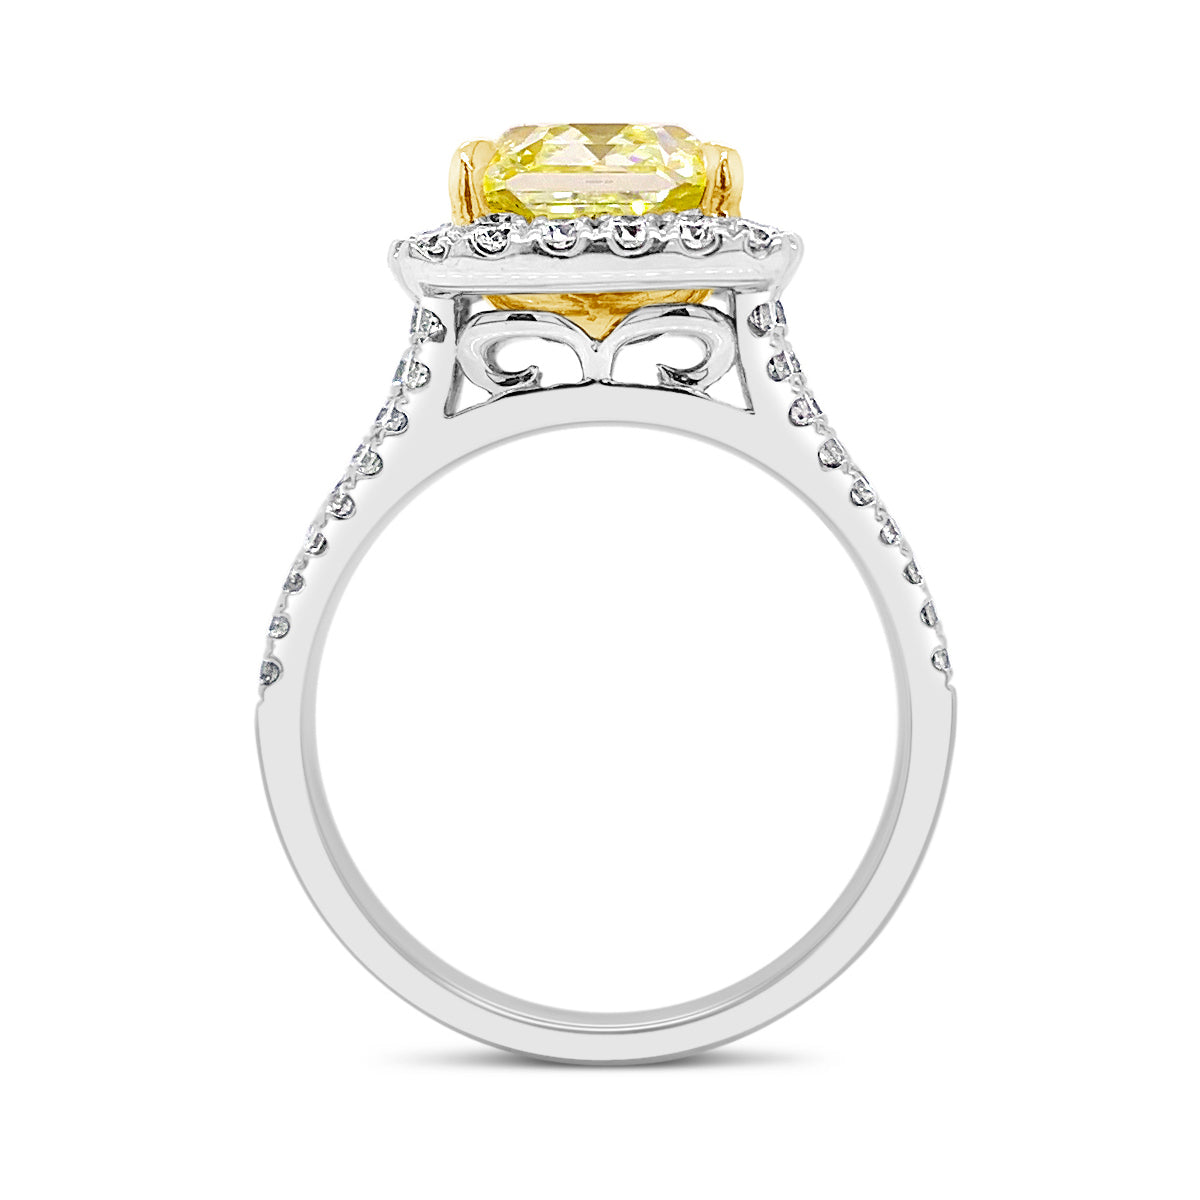 Fancy Light Yellow Radiant Halo Diamond Engagement Ring  - 18 kt white gold weighting 6.09 grams  - 68 round diamonds totaling 0.93 carats  - 1 Fancy light yellow radiant cut totaling 3.29 VS2-GIA